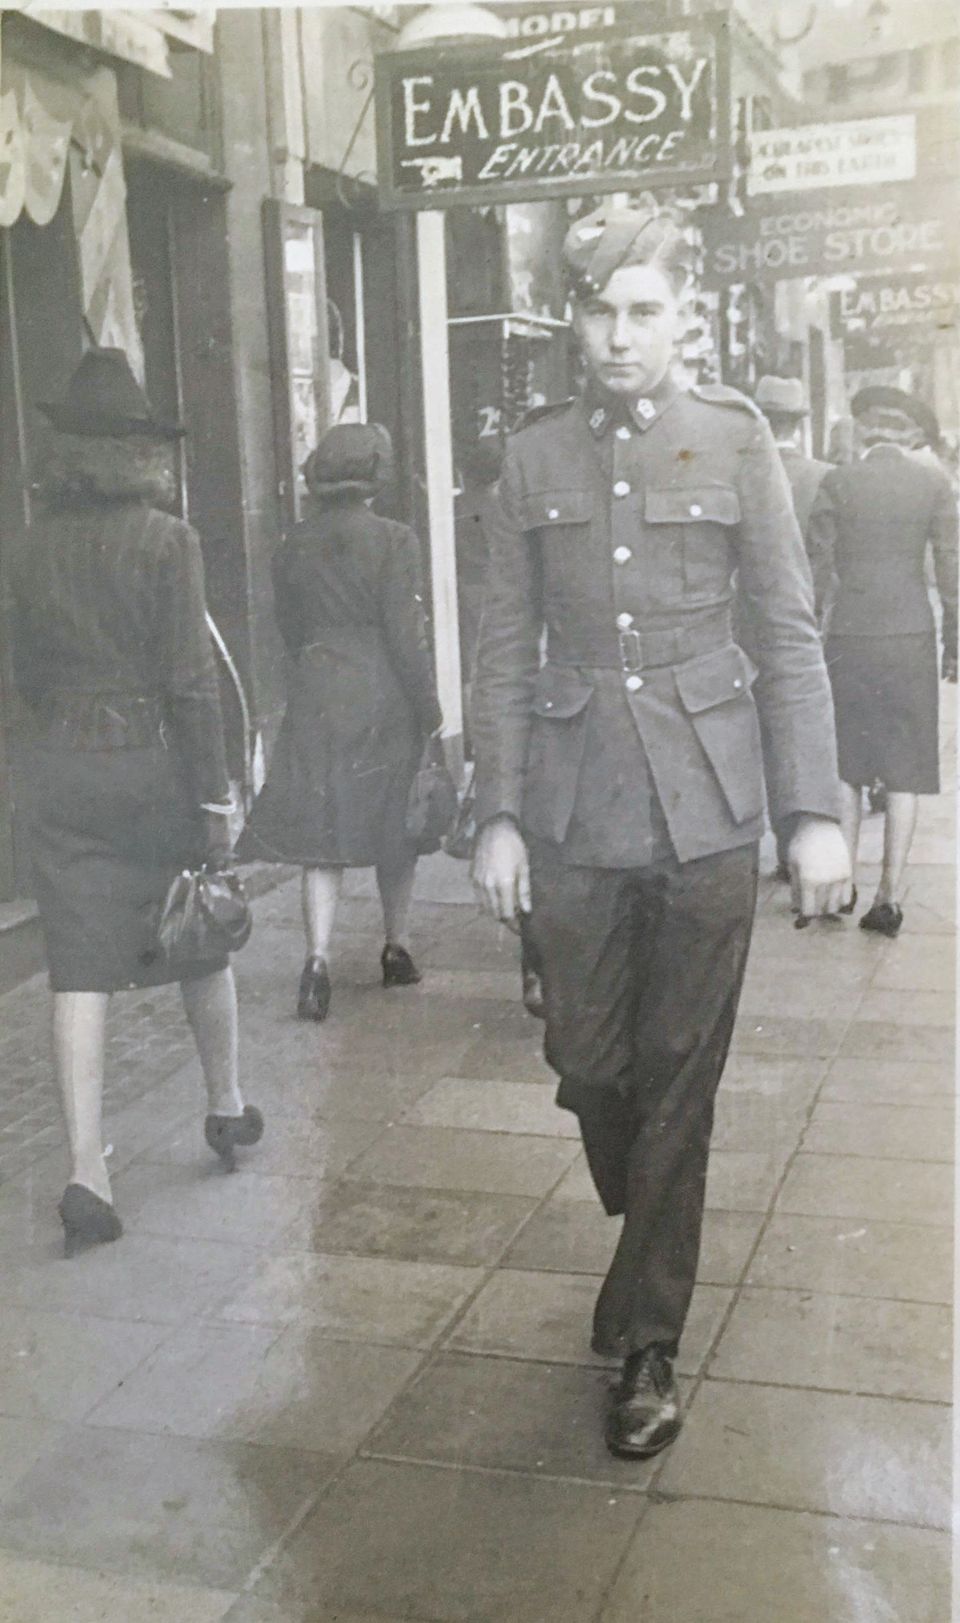 A photograph of a young soldier walking down a busy city street